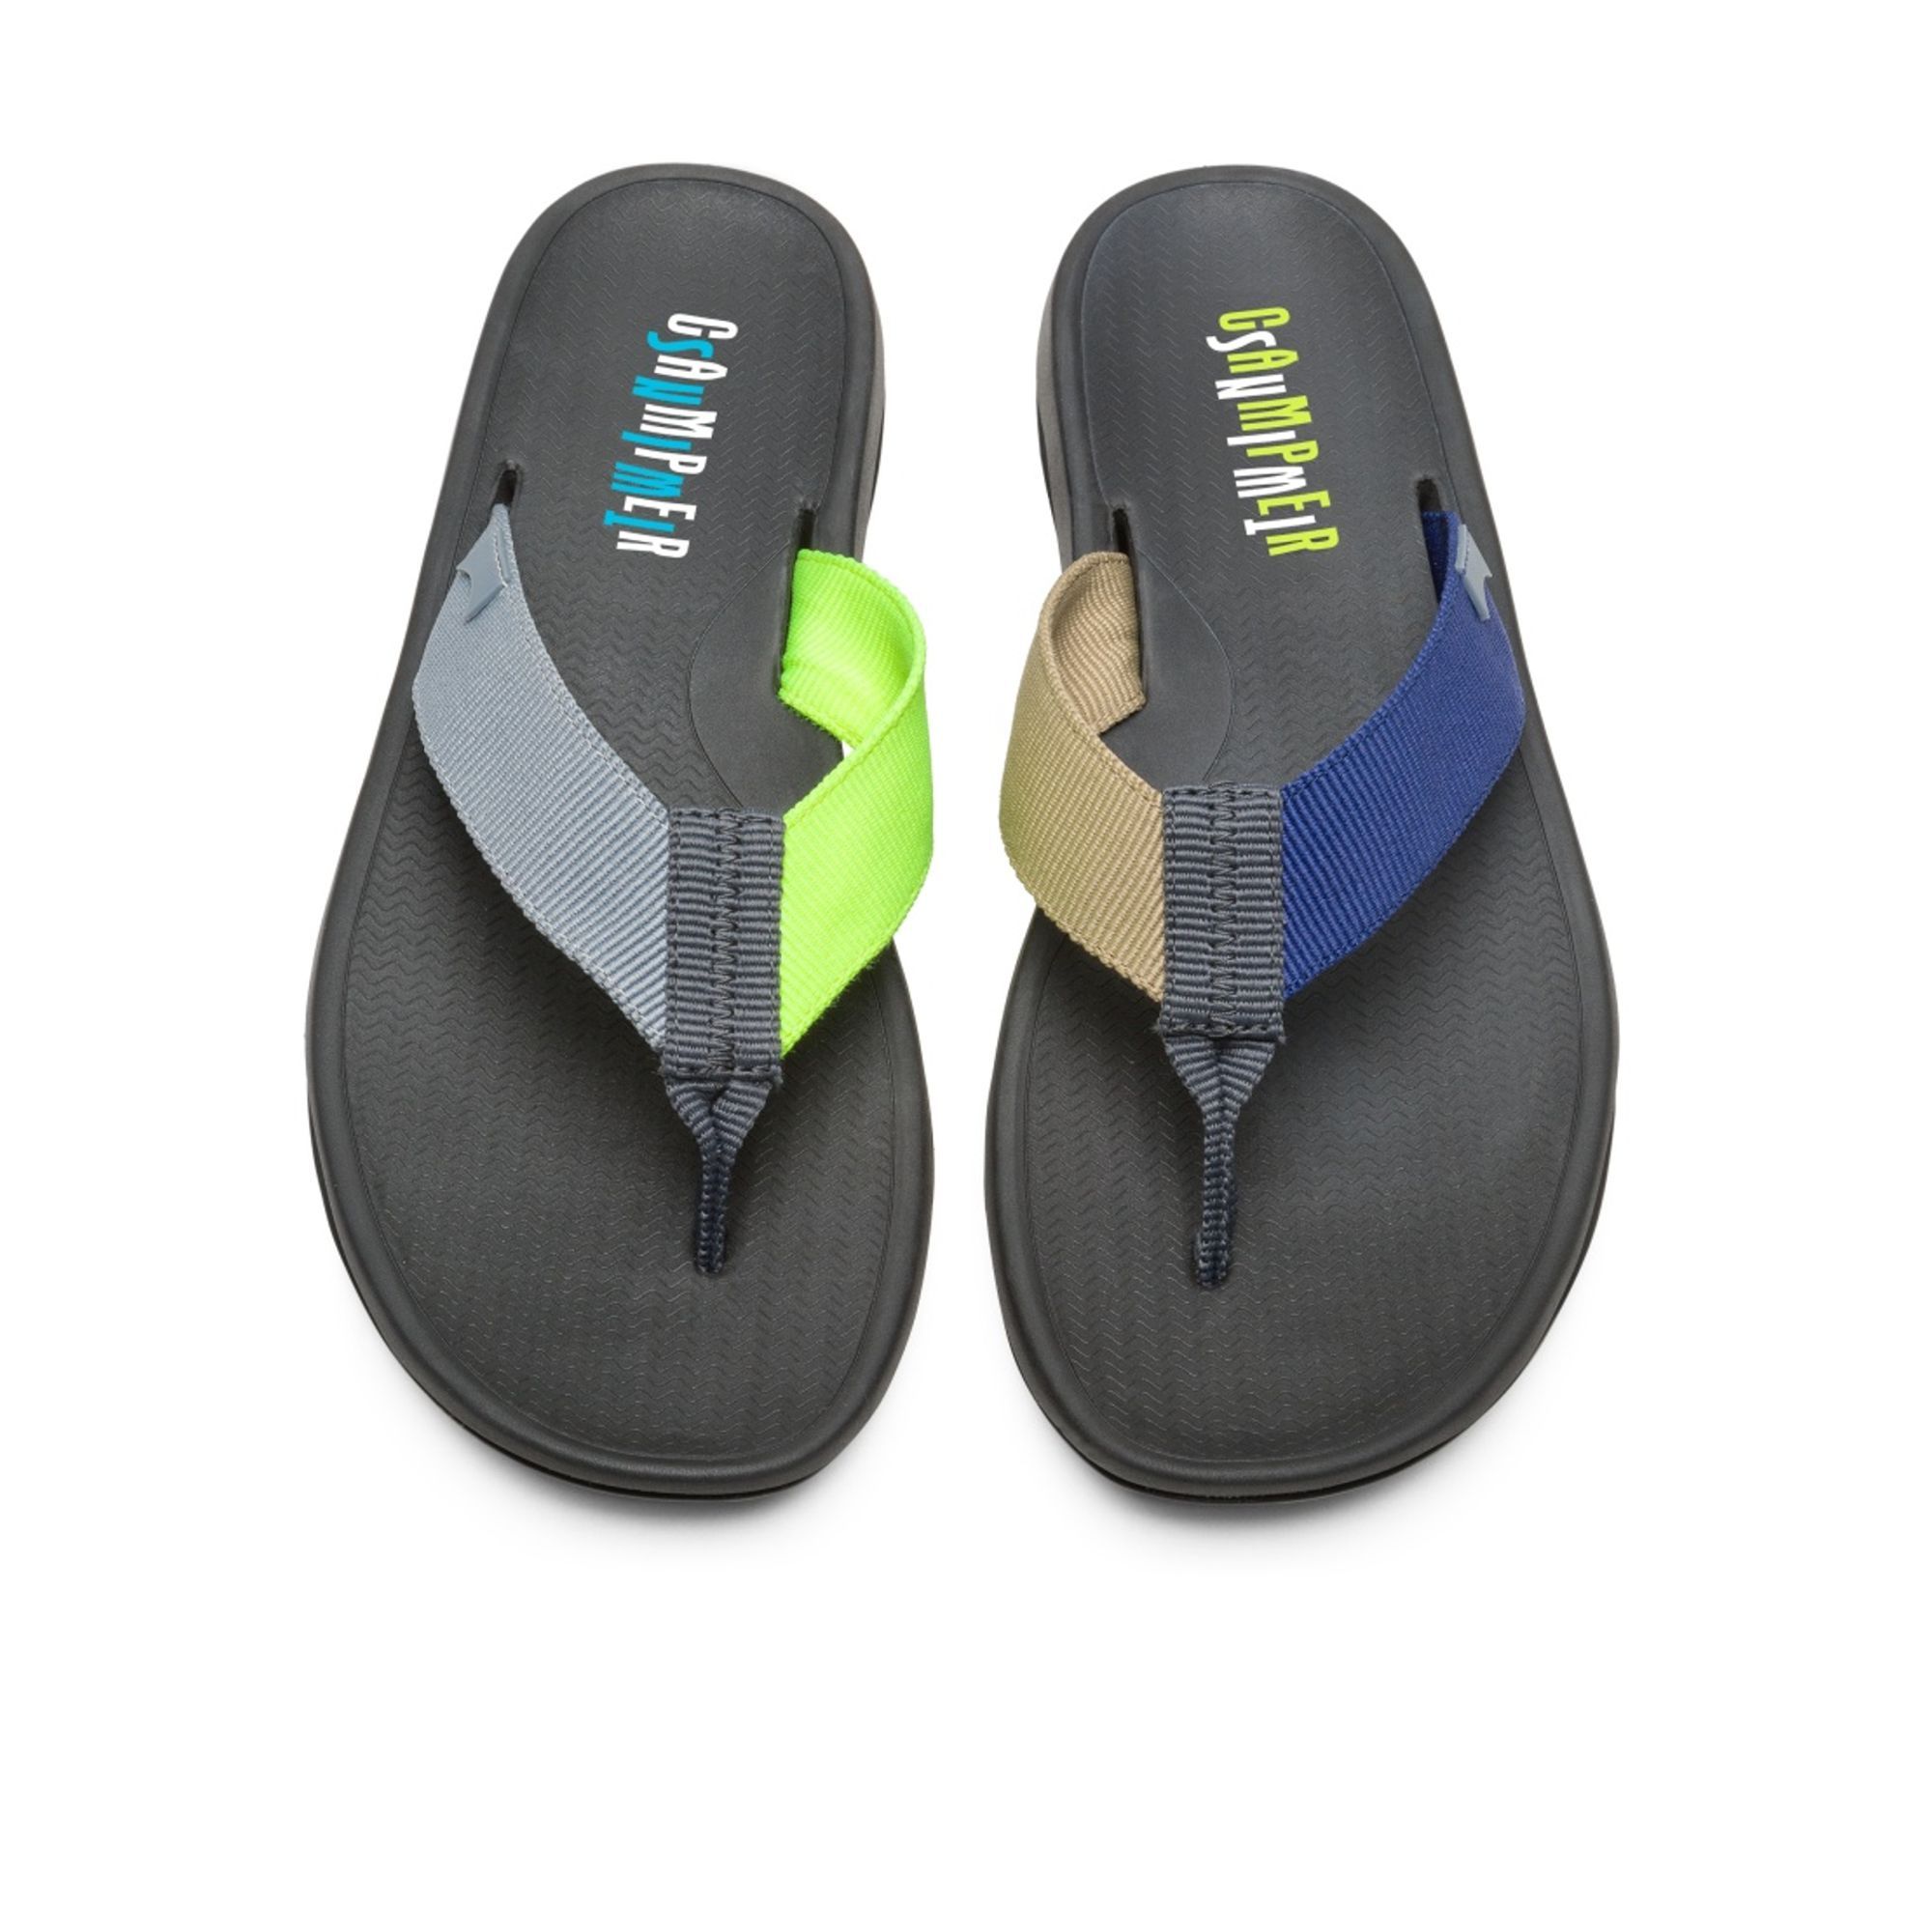 Men’s gray, neon yellow, navy and beige textile sandal.

Our classic TWINS concept — opposite yet complementary — lives on in these mismatched men’s shoes that form a truly unique pair.